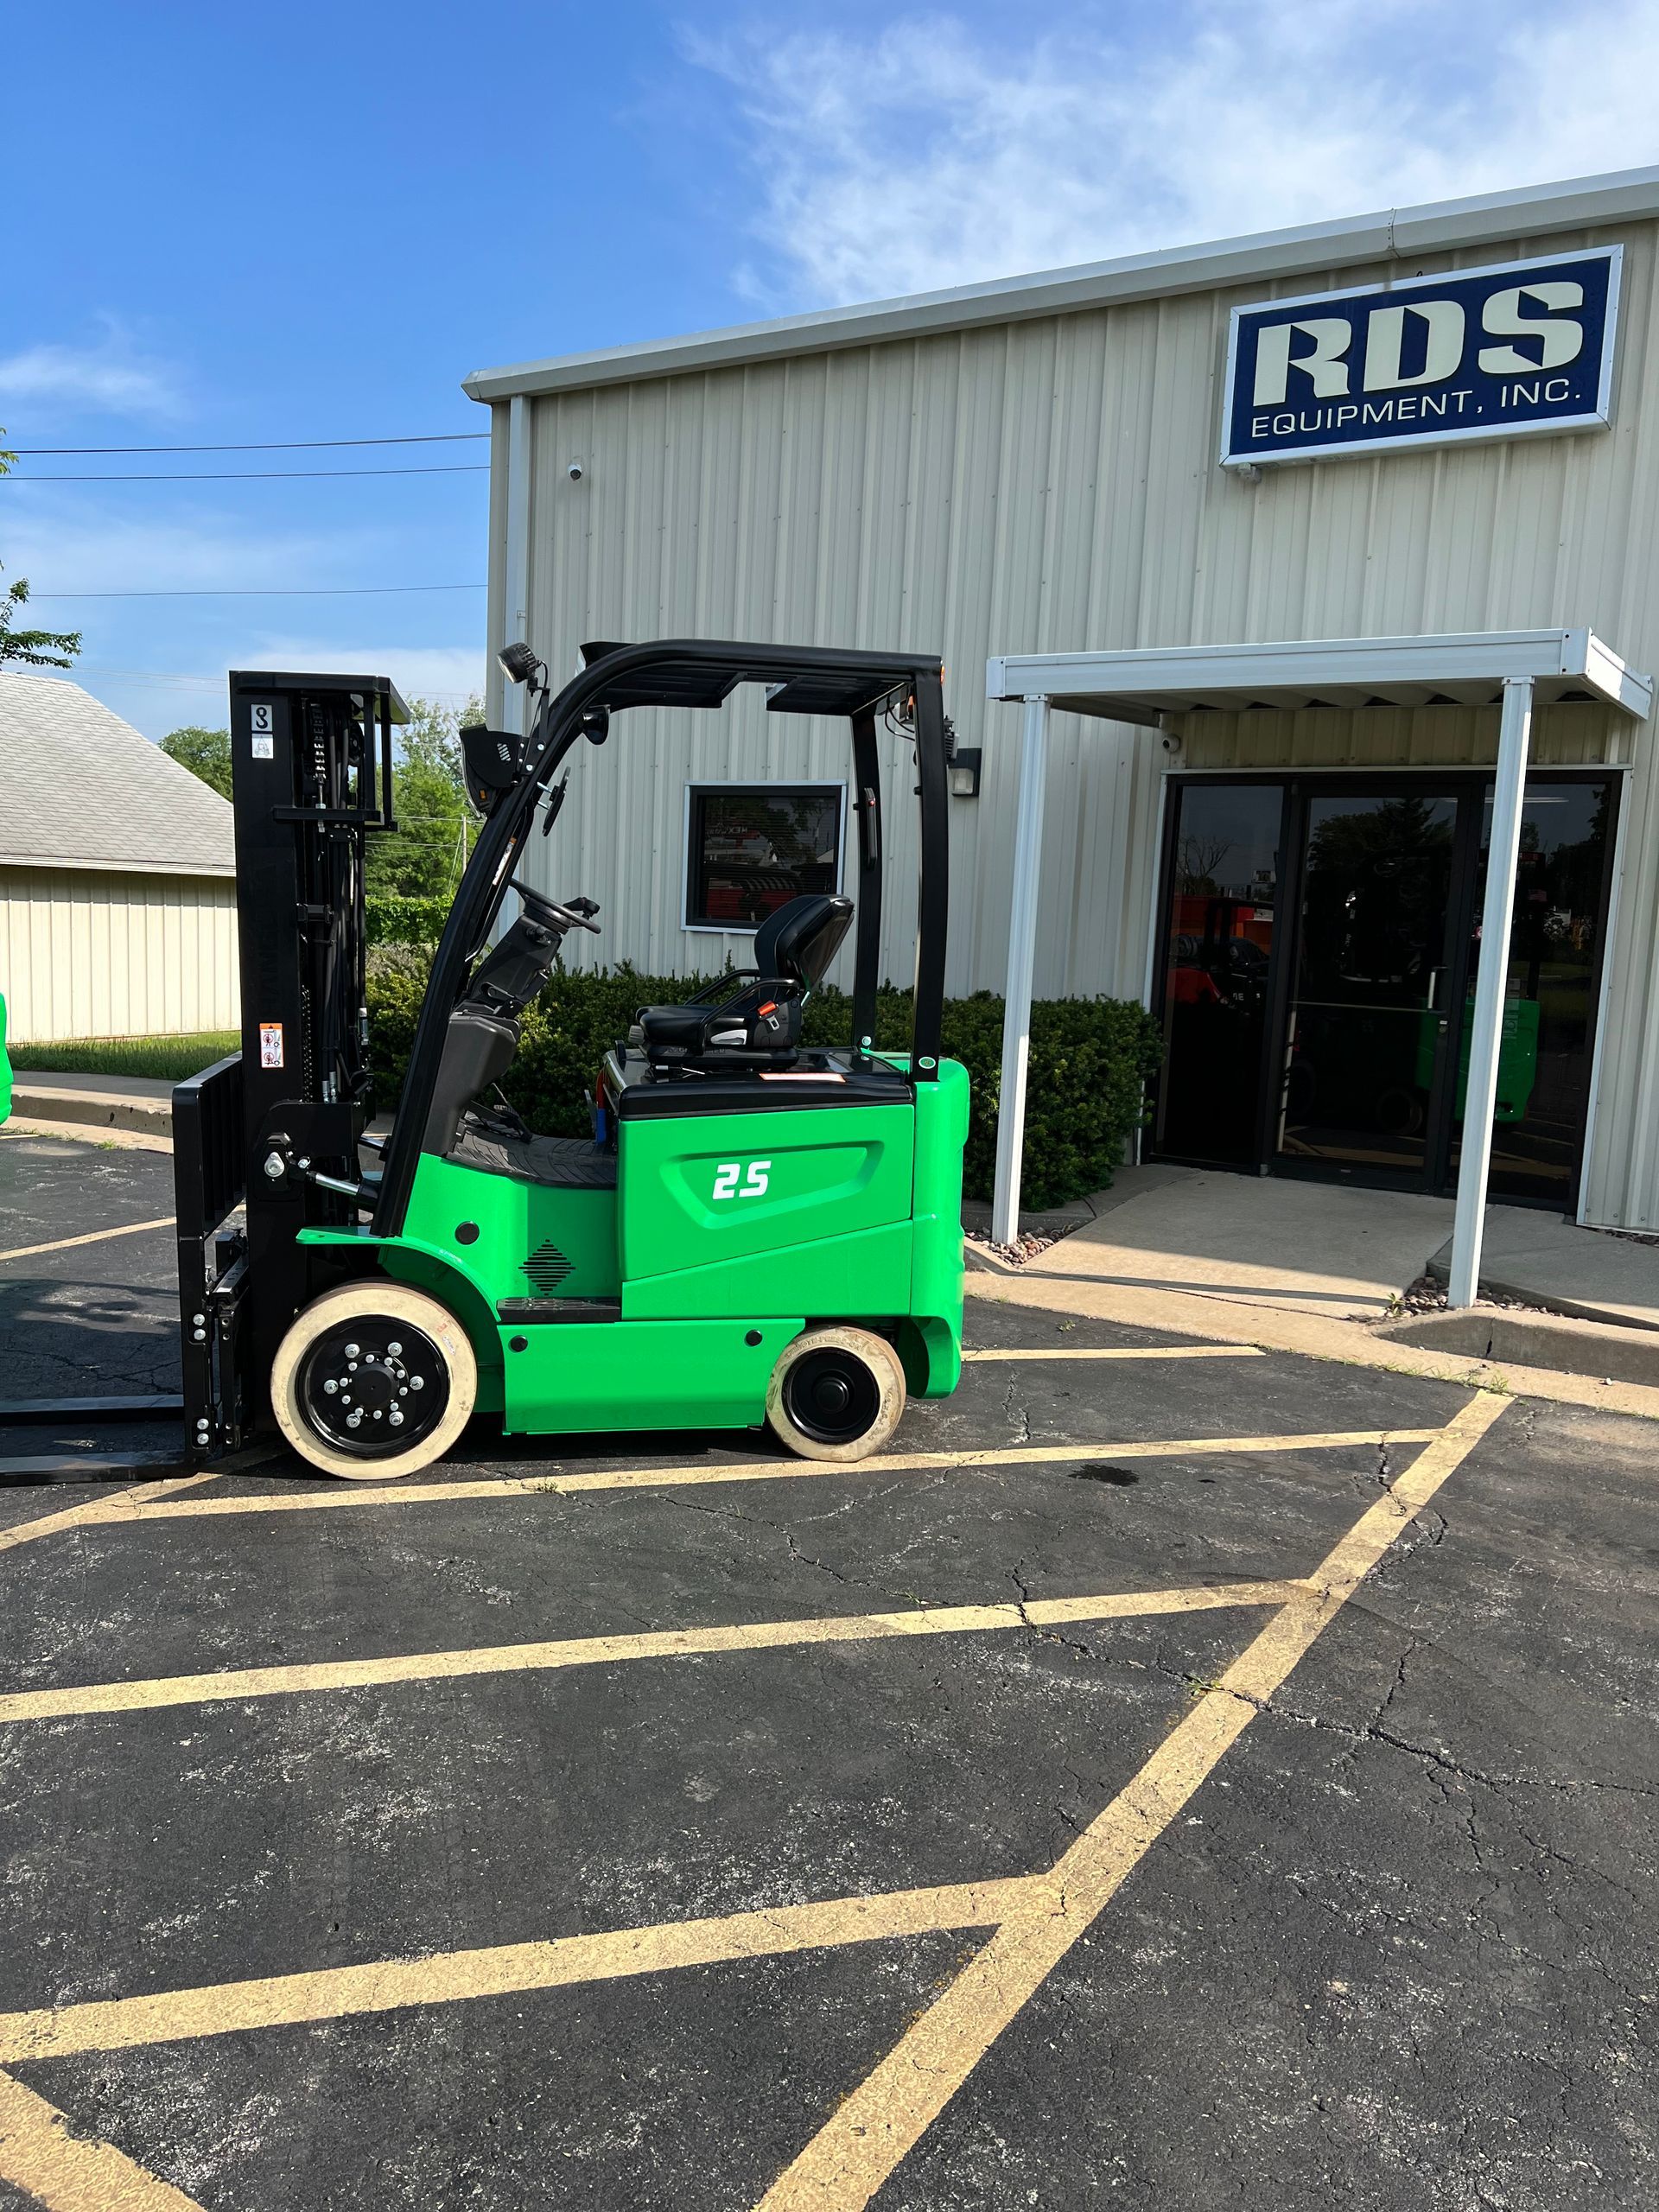 2012 Hyundai 15BT-7 Unit 10751 - Forklifts,  Utility and Golf Carts in Independence, MO